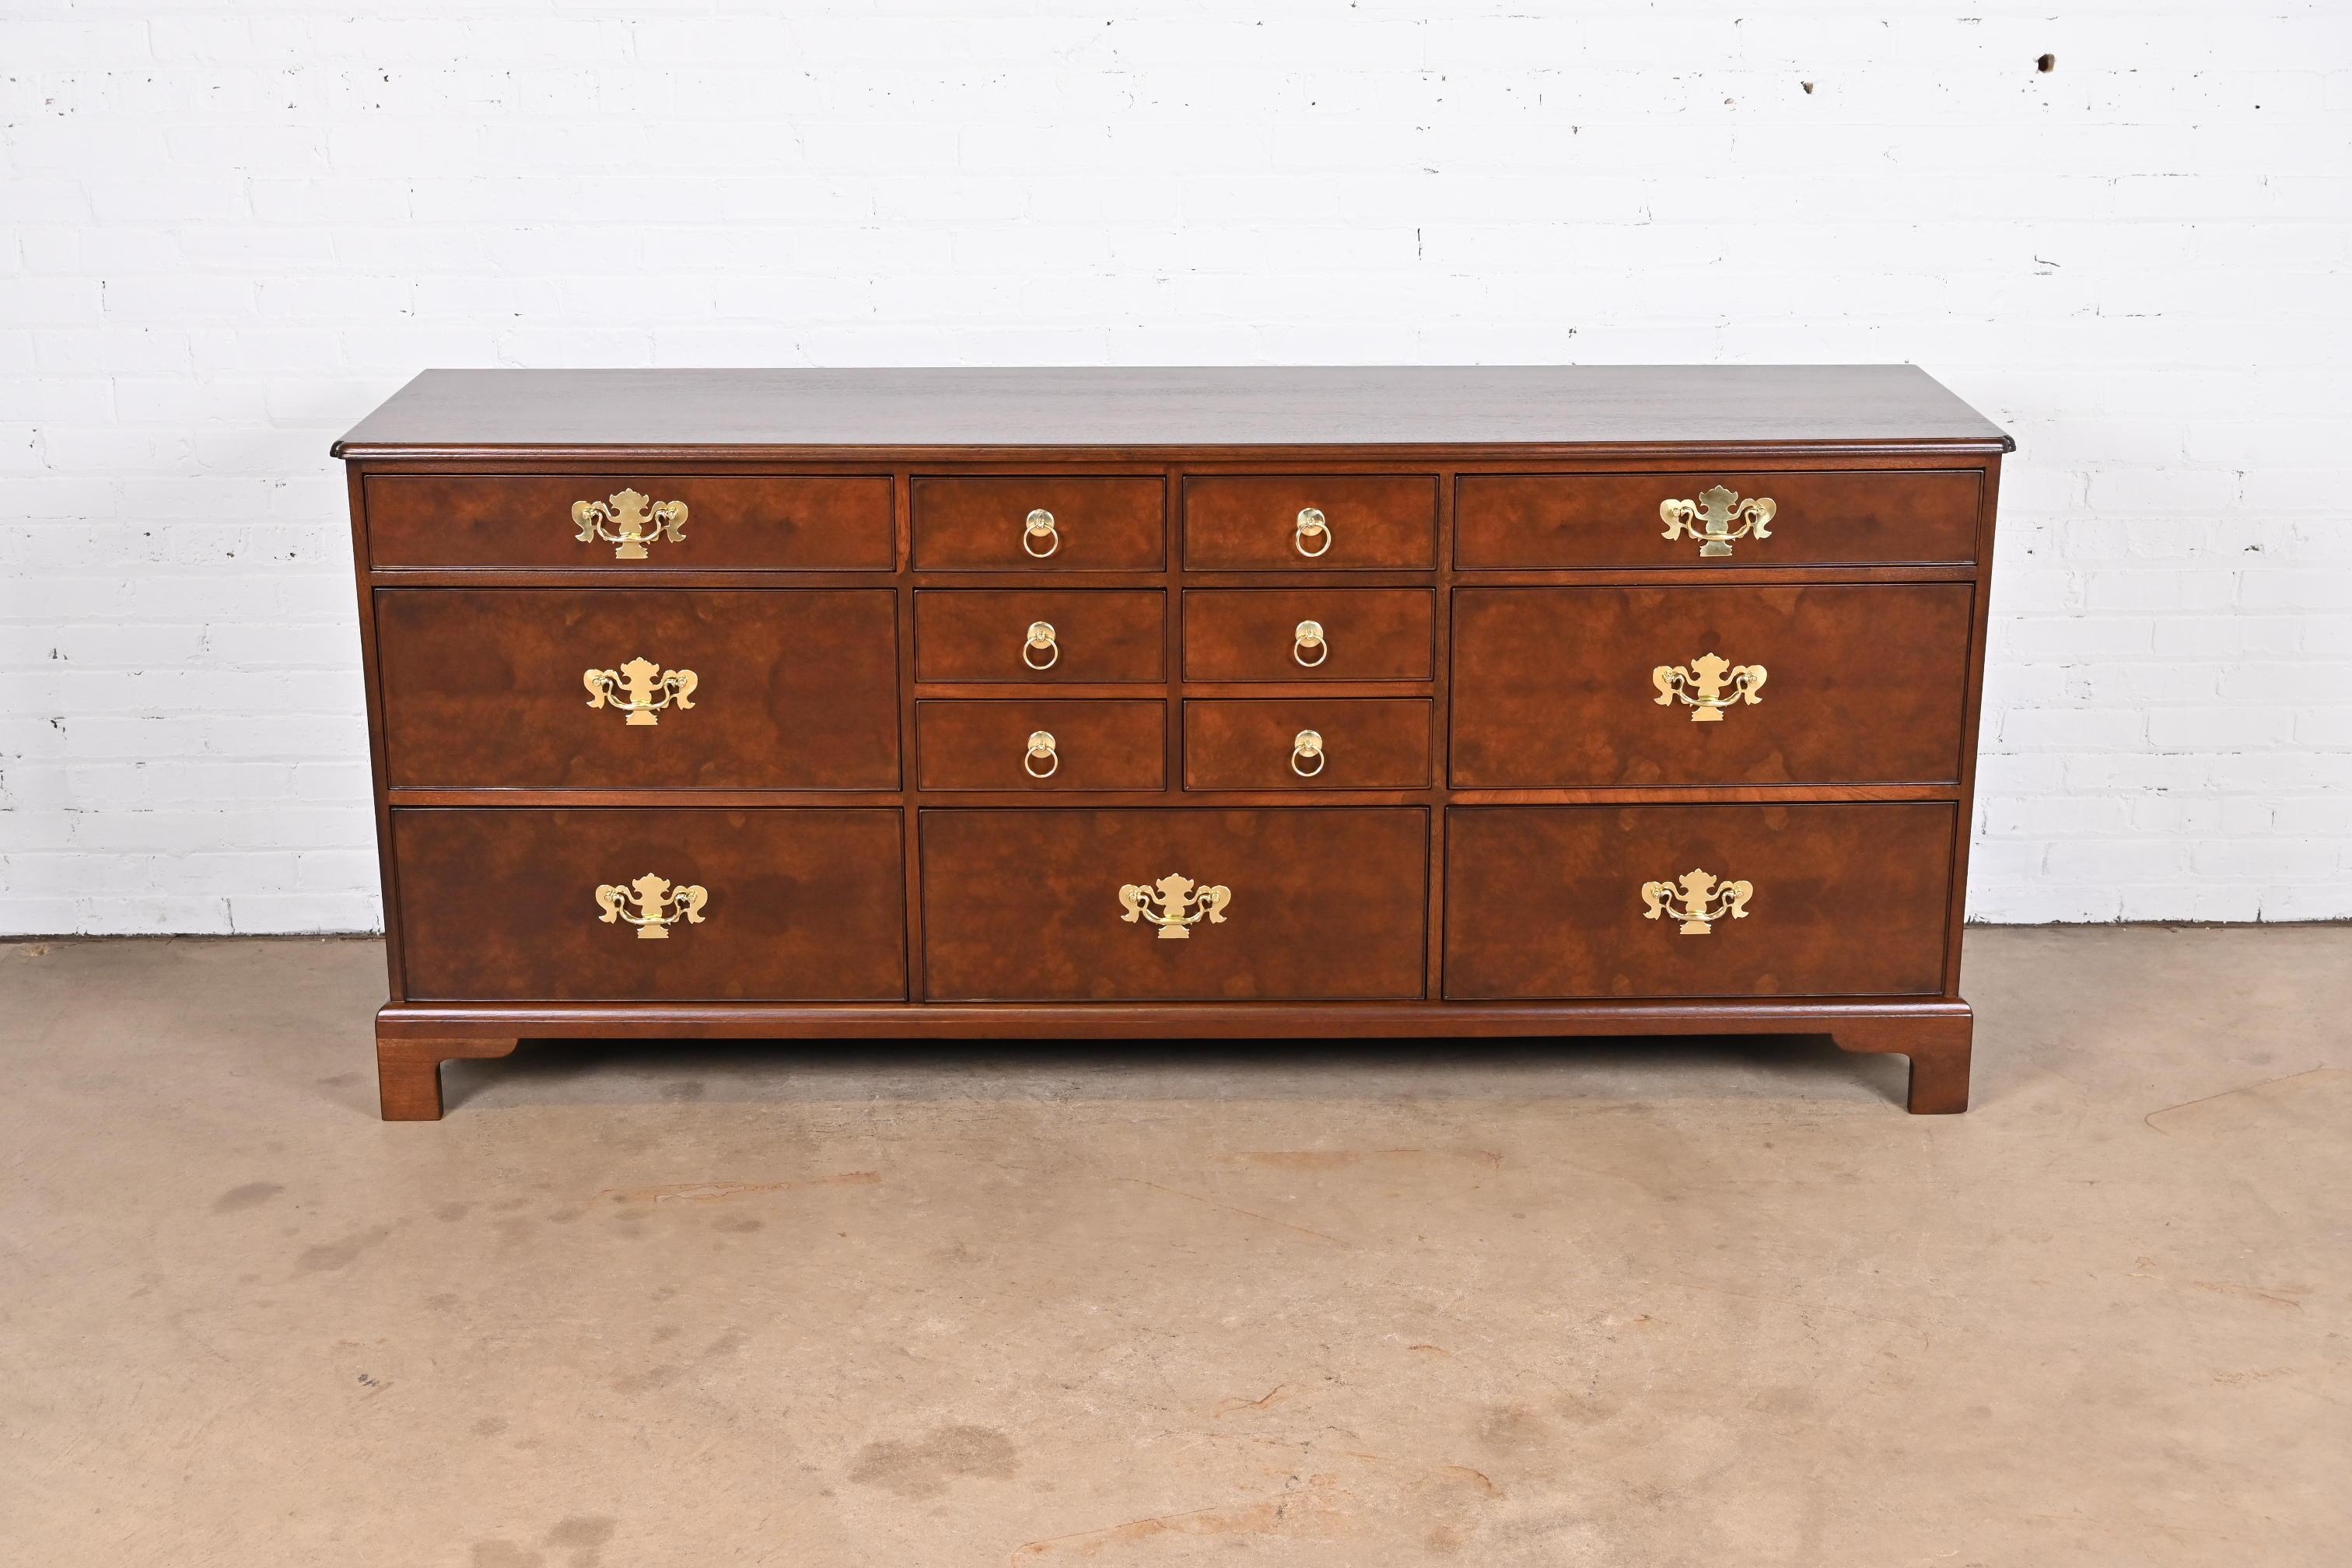 An exceptional Georgian or Chippendale style thirteen-drawer bureau dresser or credenza

By Kittinger

USA, Mid-20th Century

Solid walnut, with gorgeous burled walnut drawer fronts, and original brass hardware.

Measures: 78.63